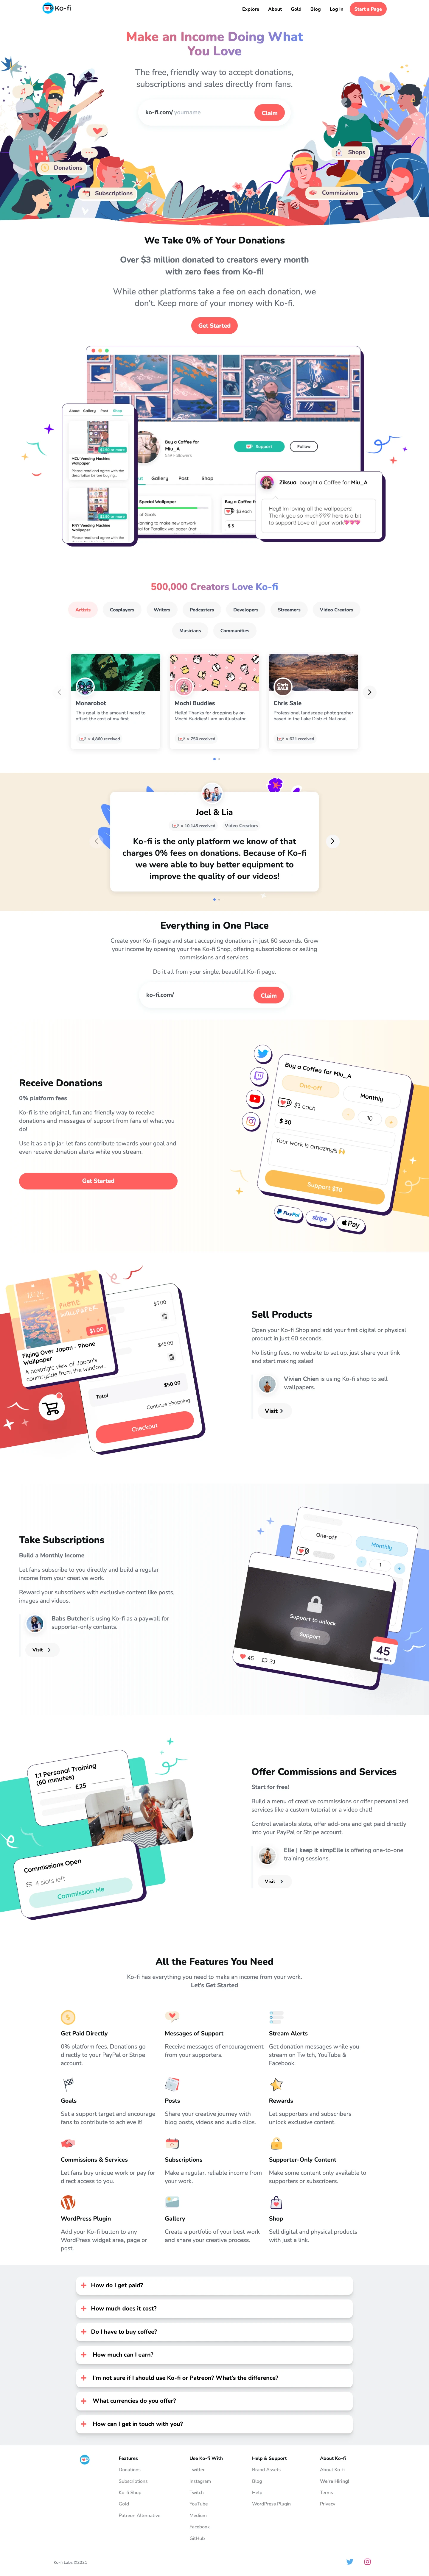 Ko-fi Landing Page Example: Make an Income Doing What You Love. The free, friendly way to accept donations, subscriptions and sales directly from fans.